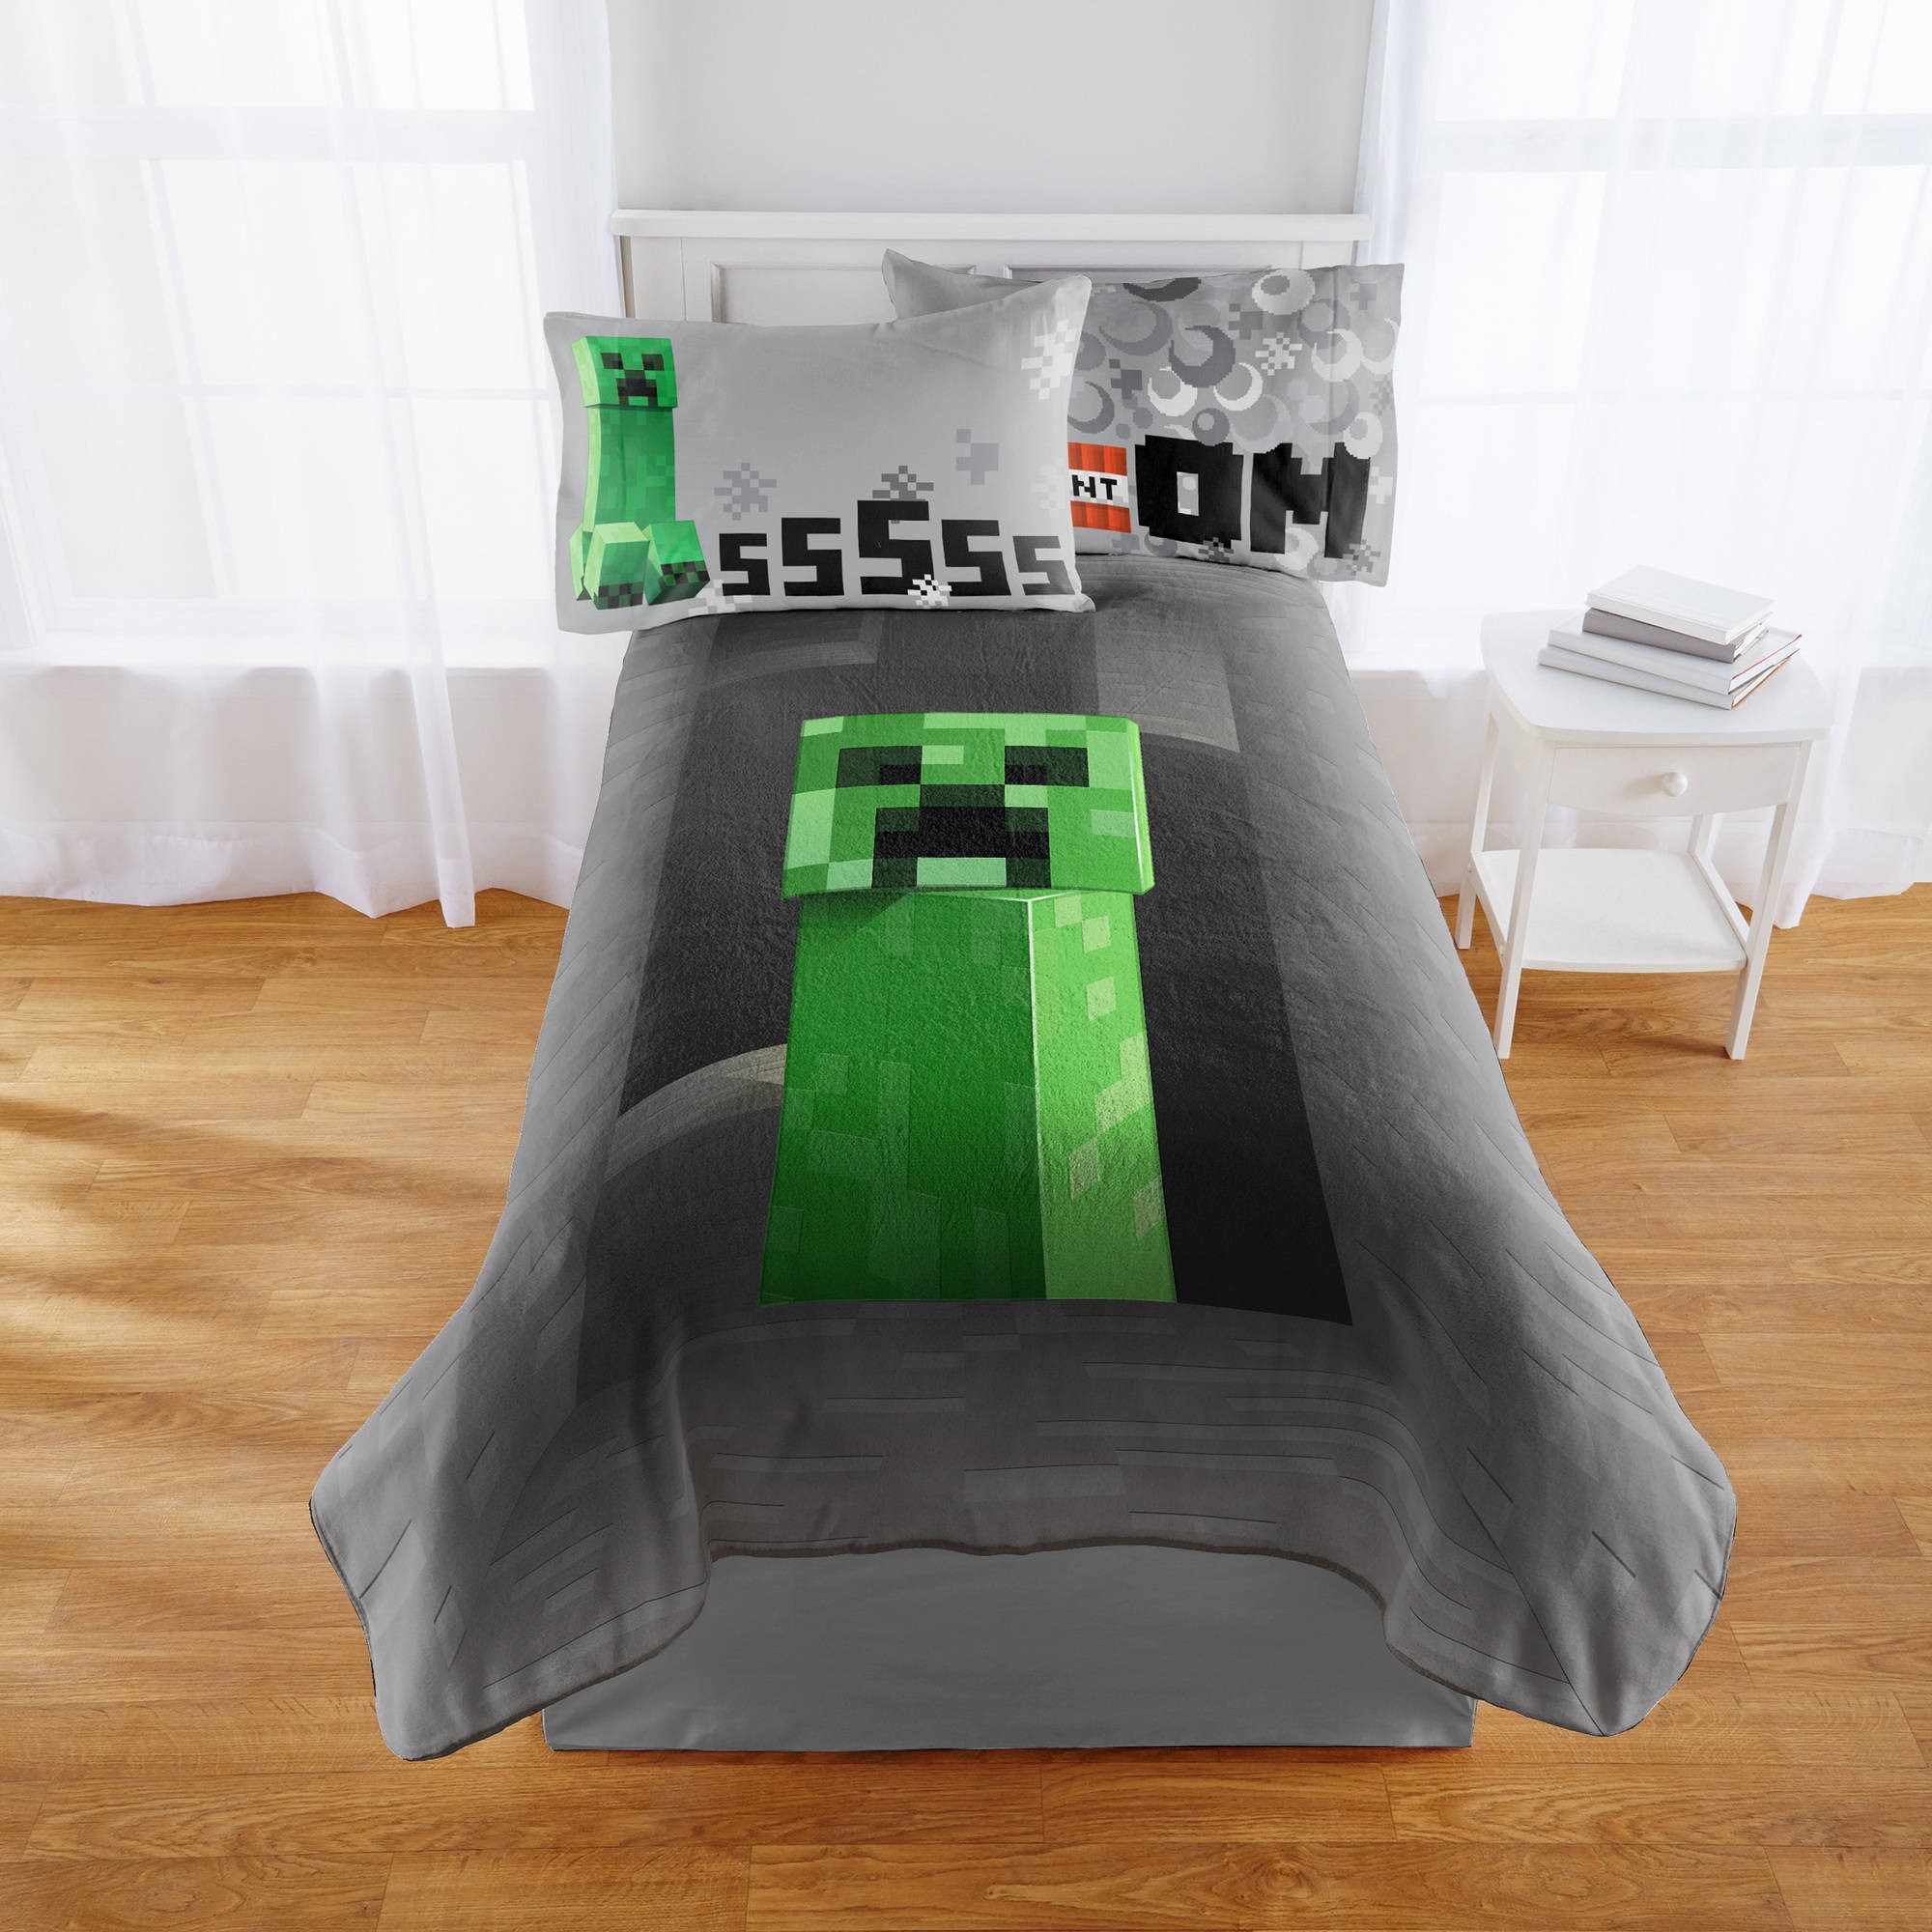 Minecraft 62" x 90" Plush Blanket, 1 Each, Gaming Bedding - image 5 of 5